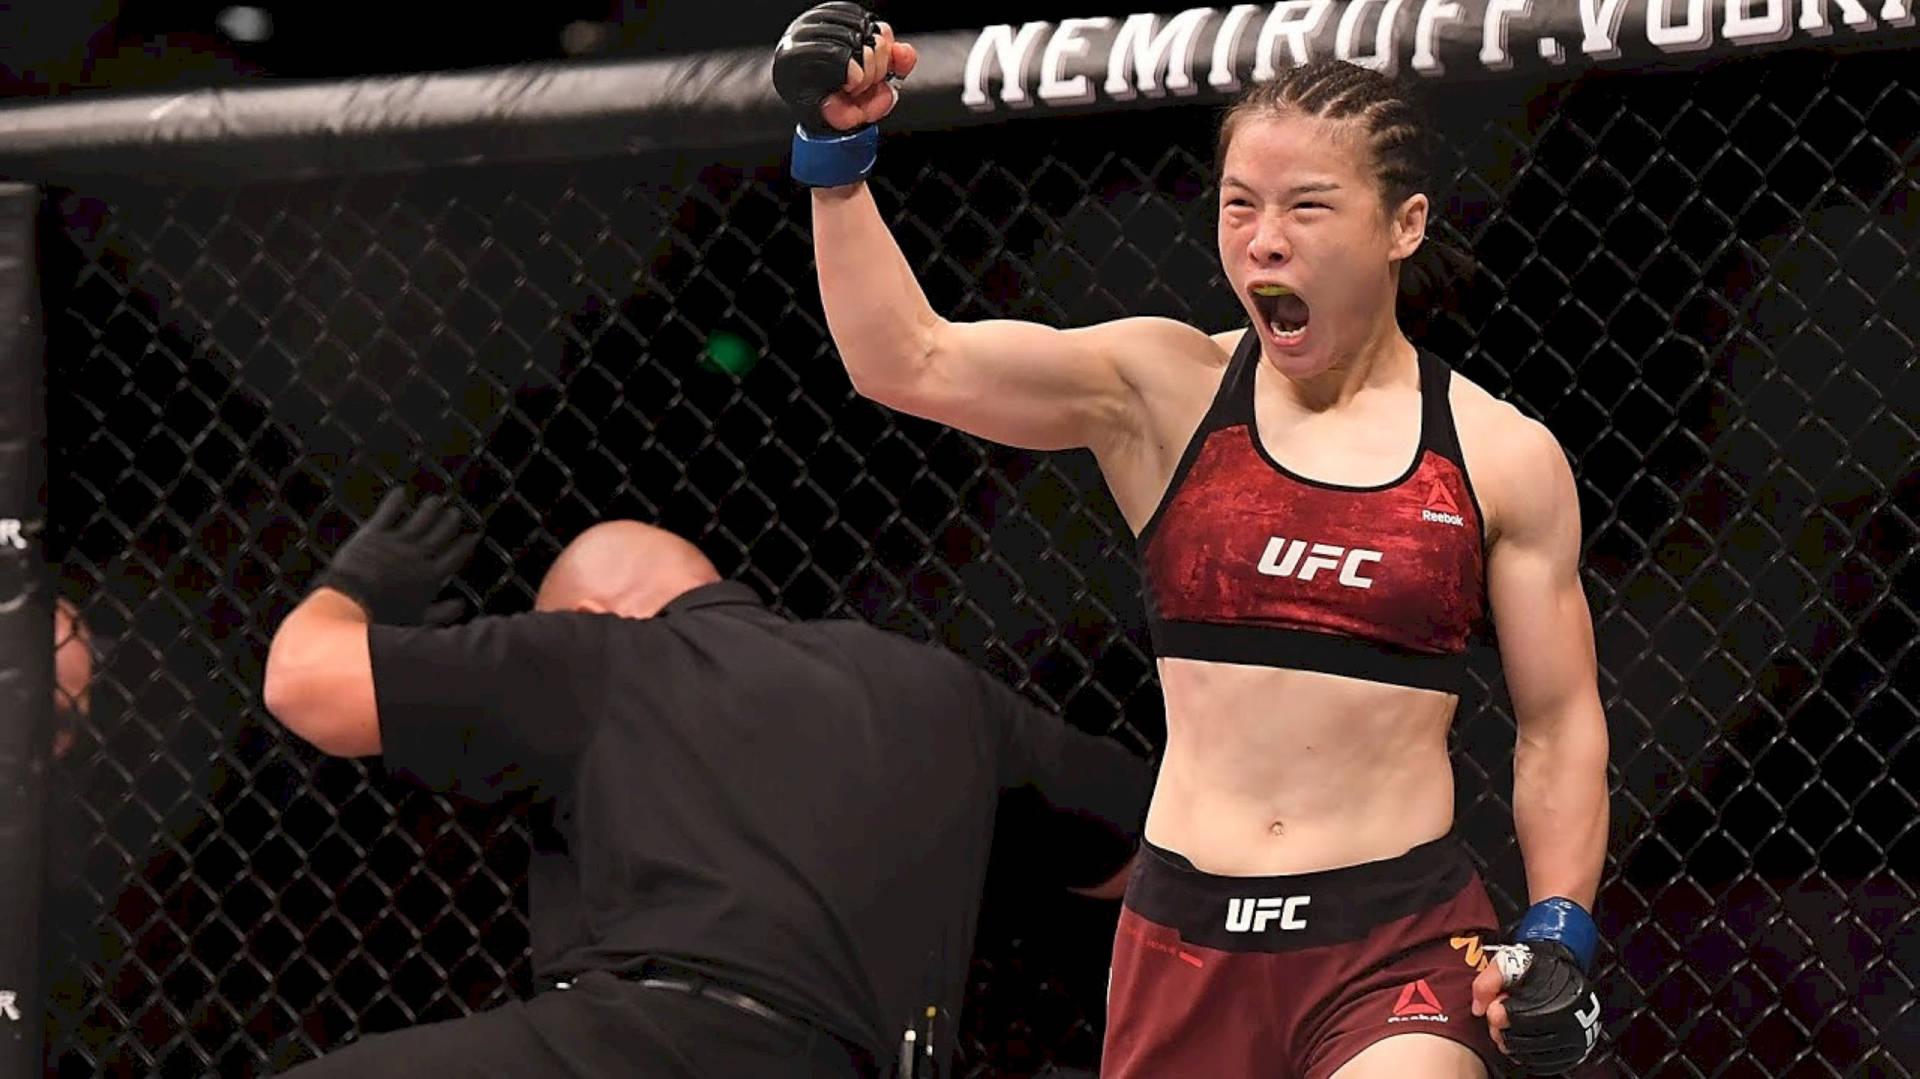 Mma Fighter Zhang Weili Victory Scream Wallpaper